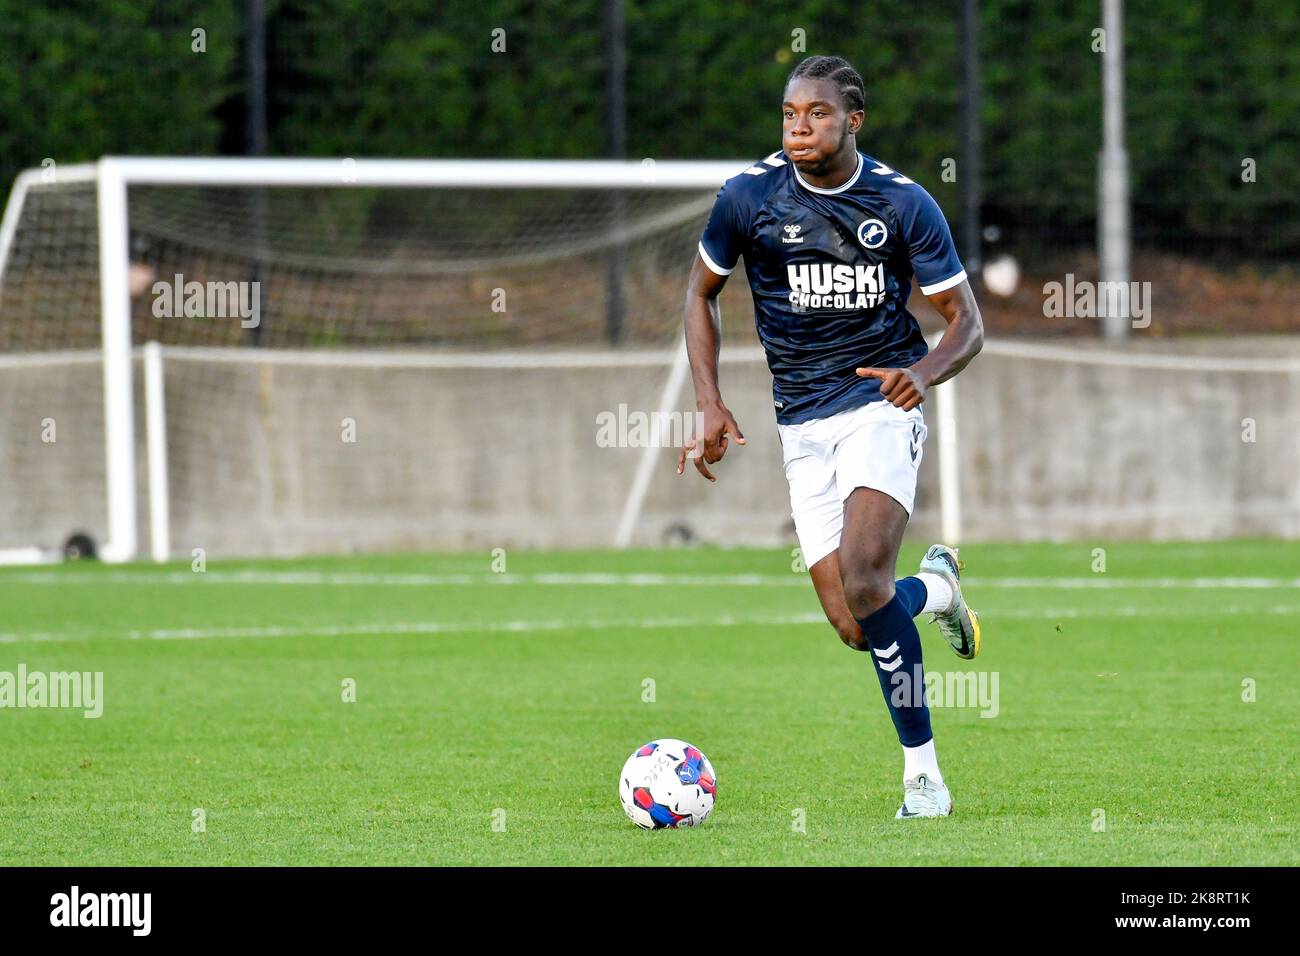 Kamarl Grant signs for Millwall FC 